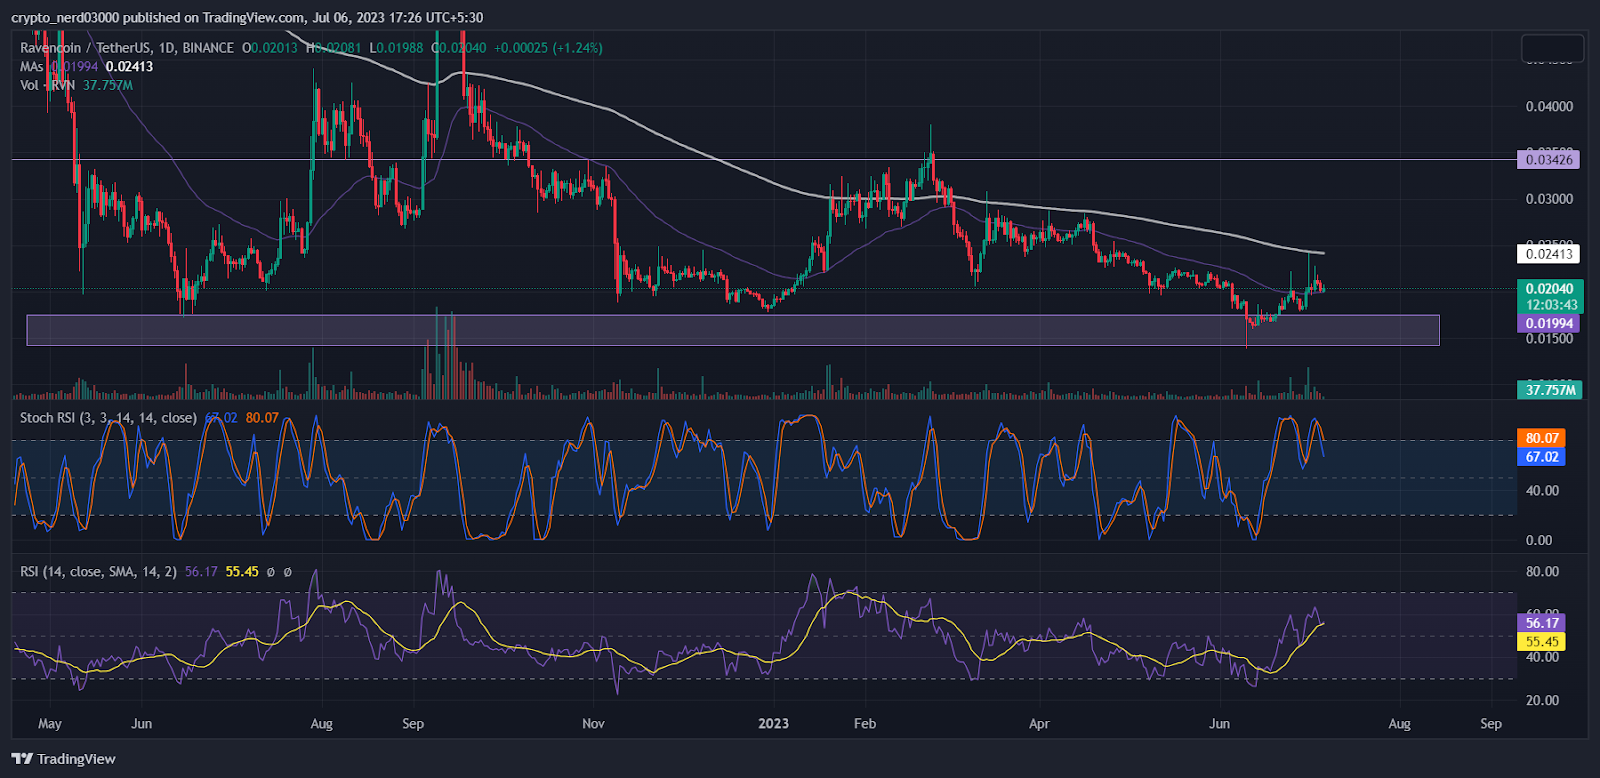 Ravencoin Price Prediction: RVN Price May Rally Above Its Barrier